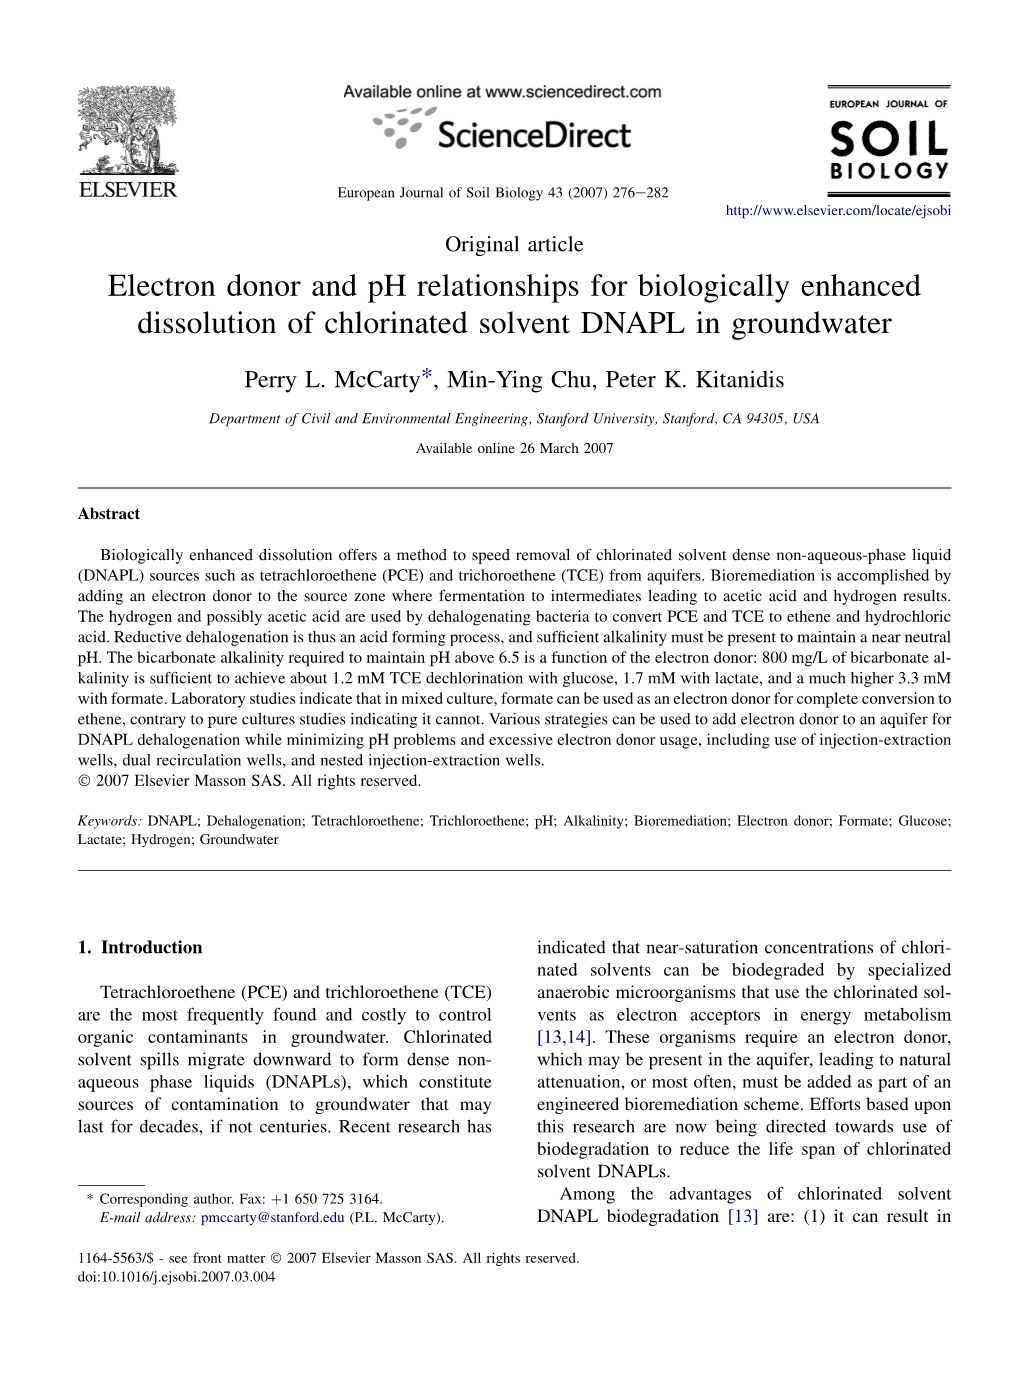 Electron Donor and Ph Relationships for Biologically Enhanced Dissolution of Chlorinated Solvent DNAPL in Groundwater